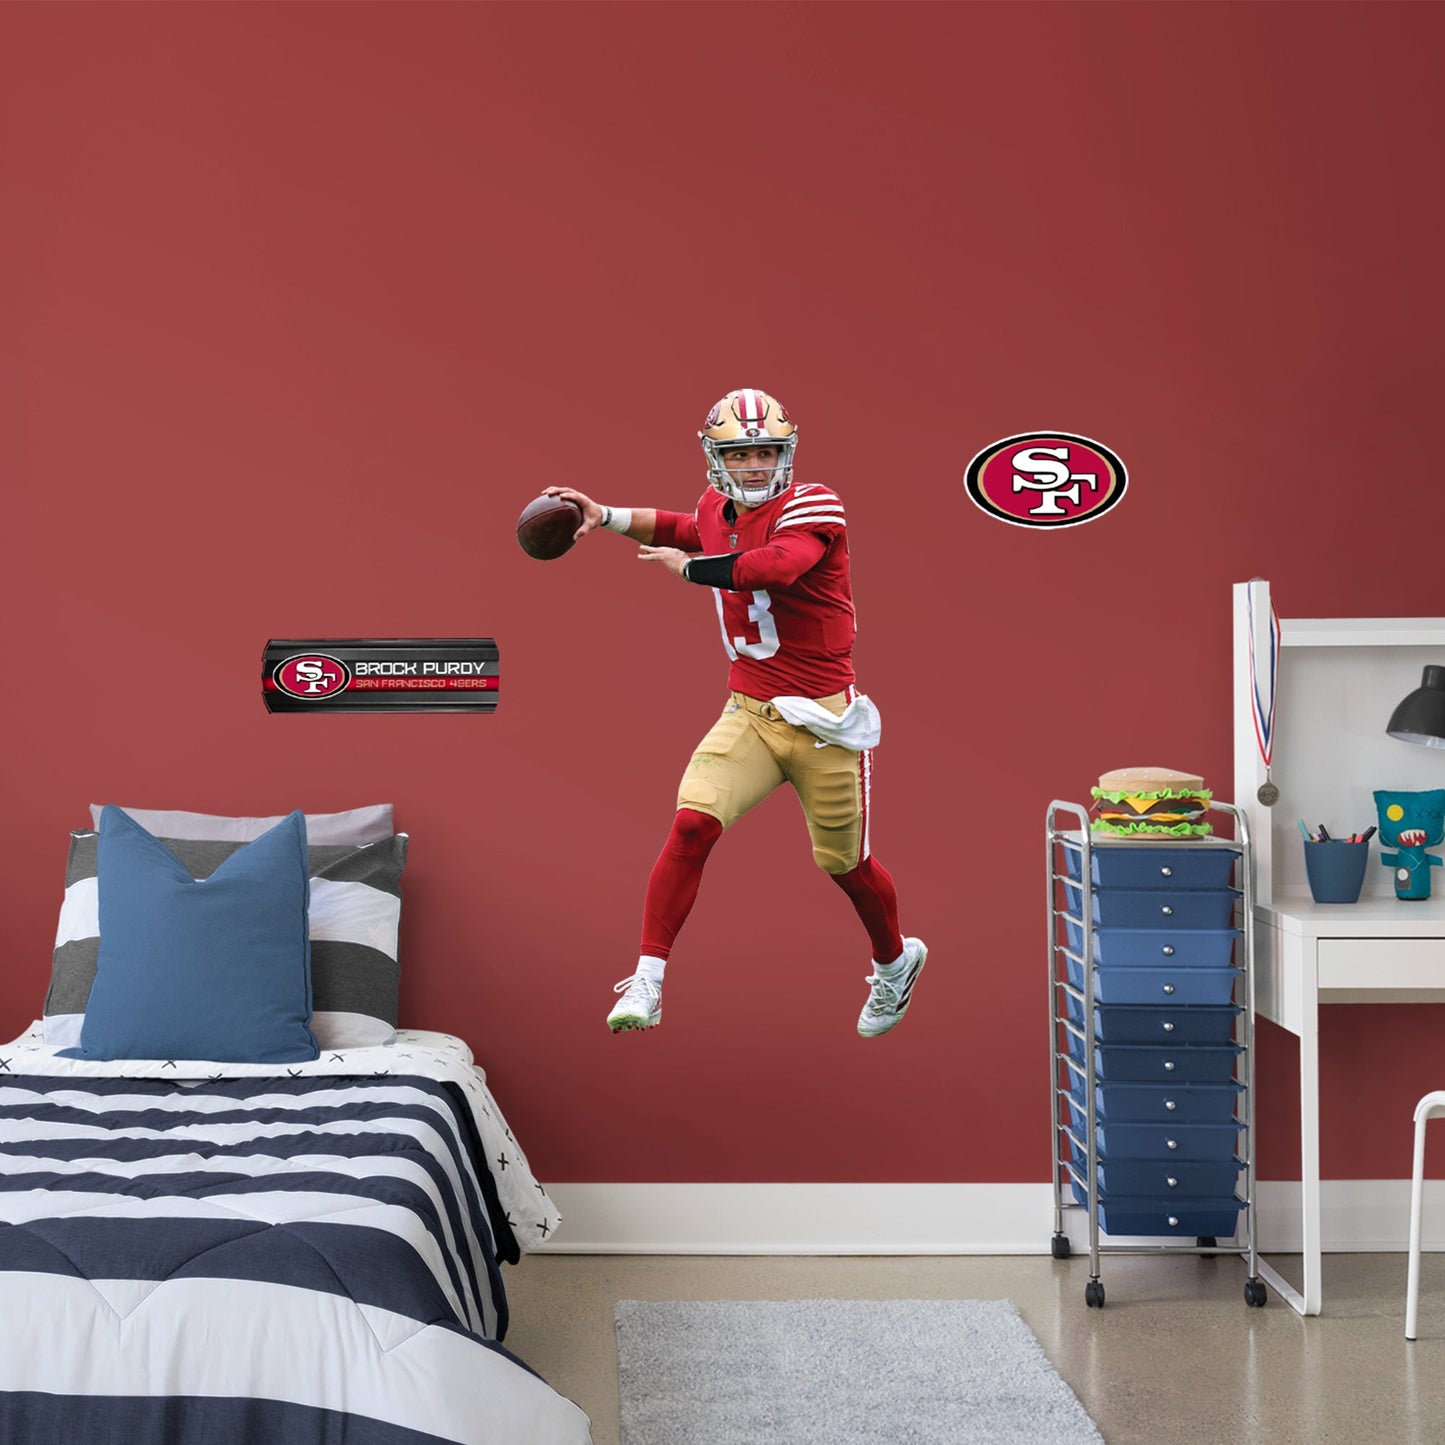 San Francisco 49ers: Brock Purdy - Officially Licensed NFL Removable Adhesive Decal